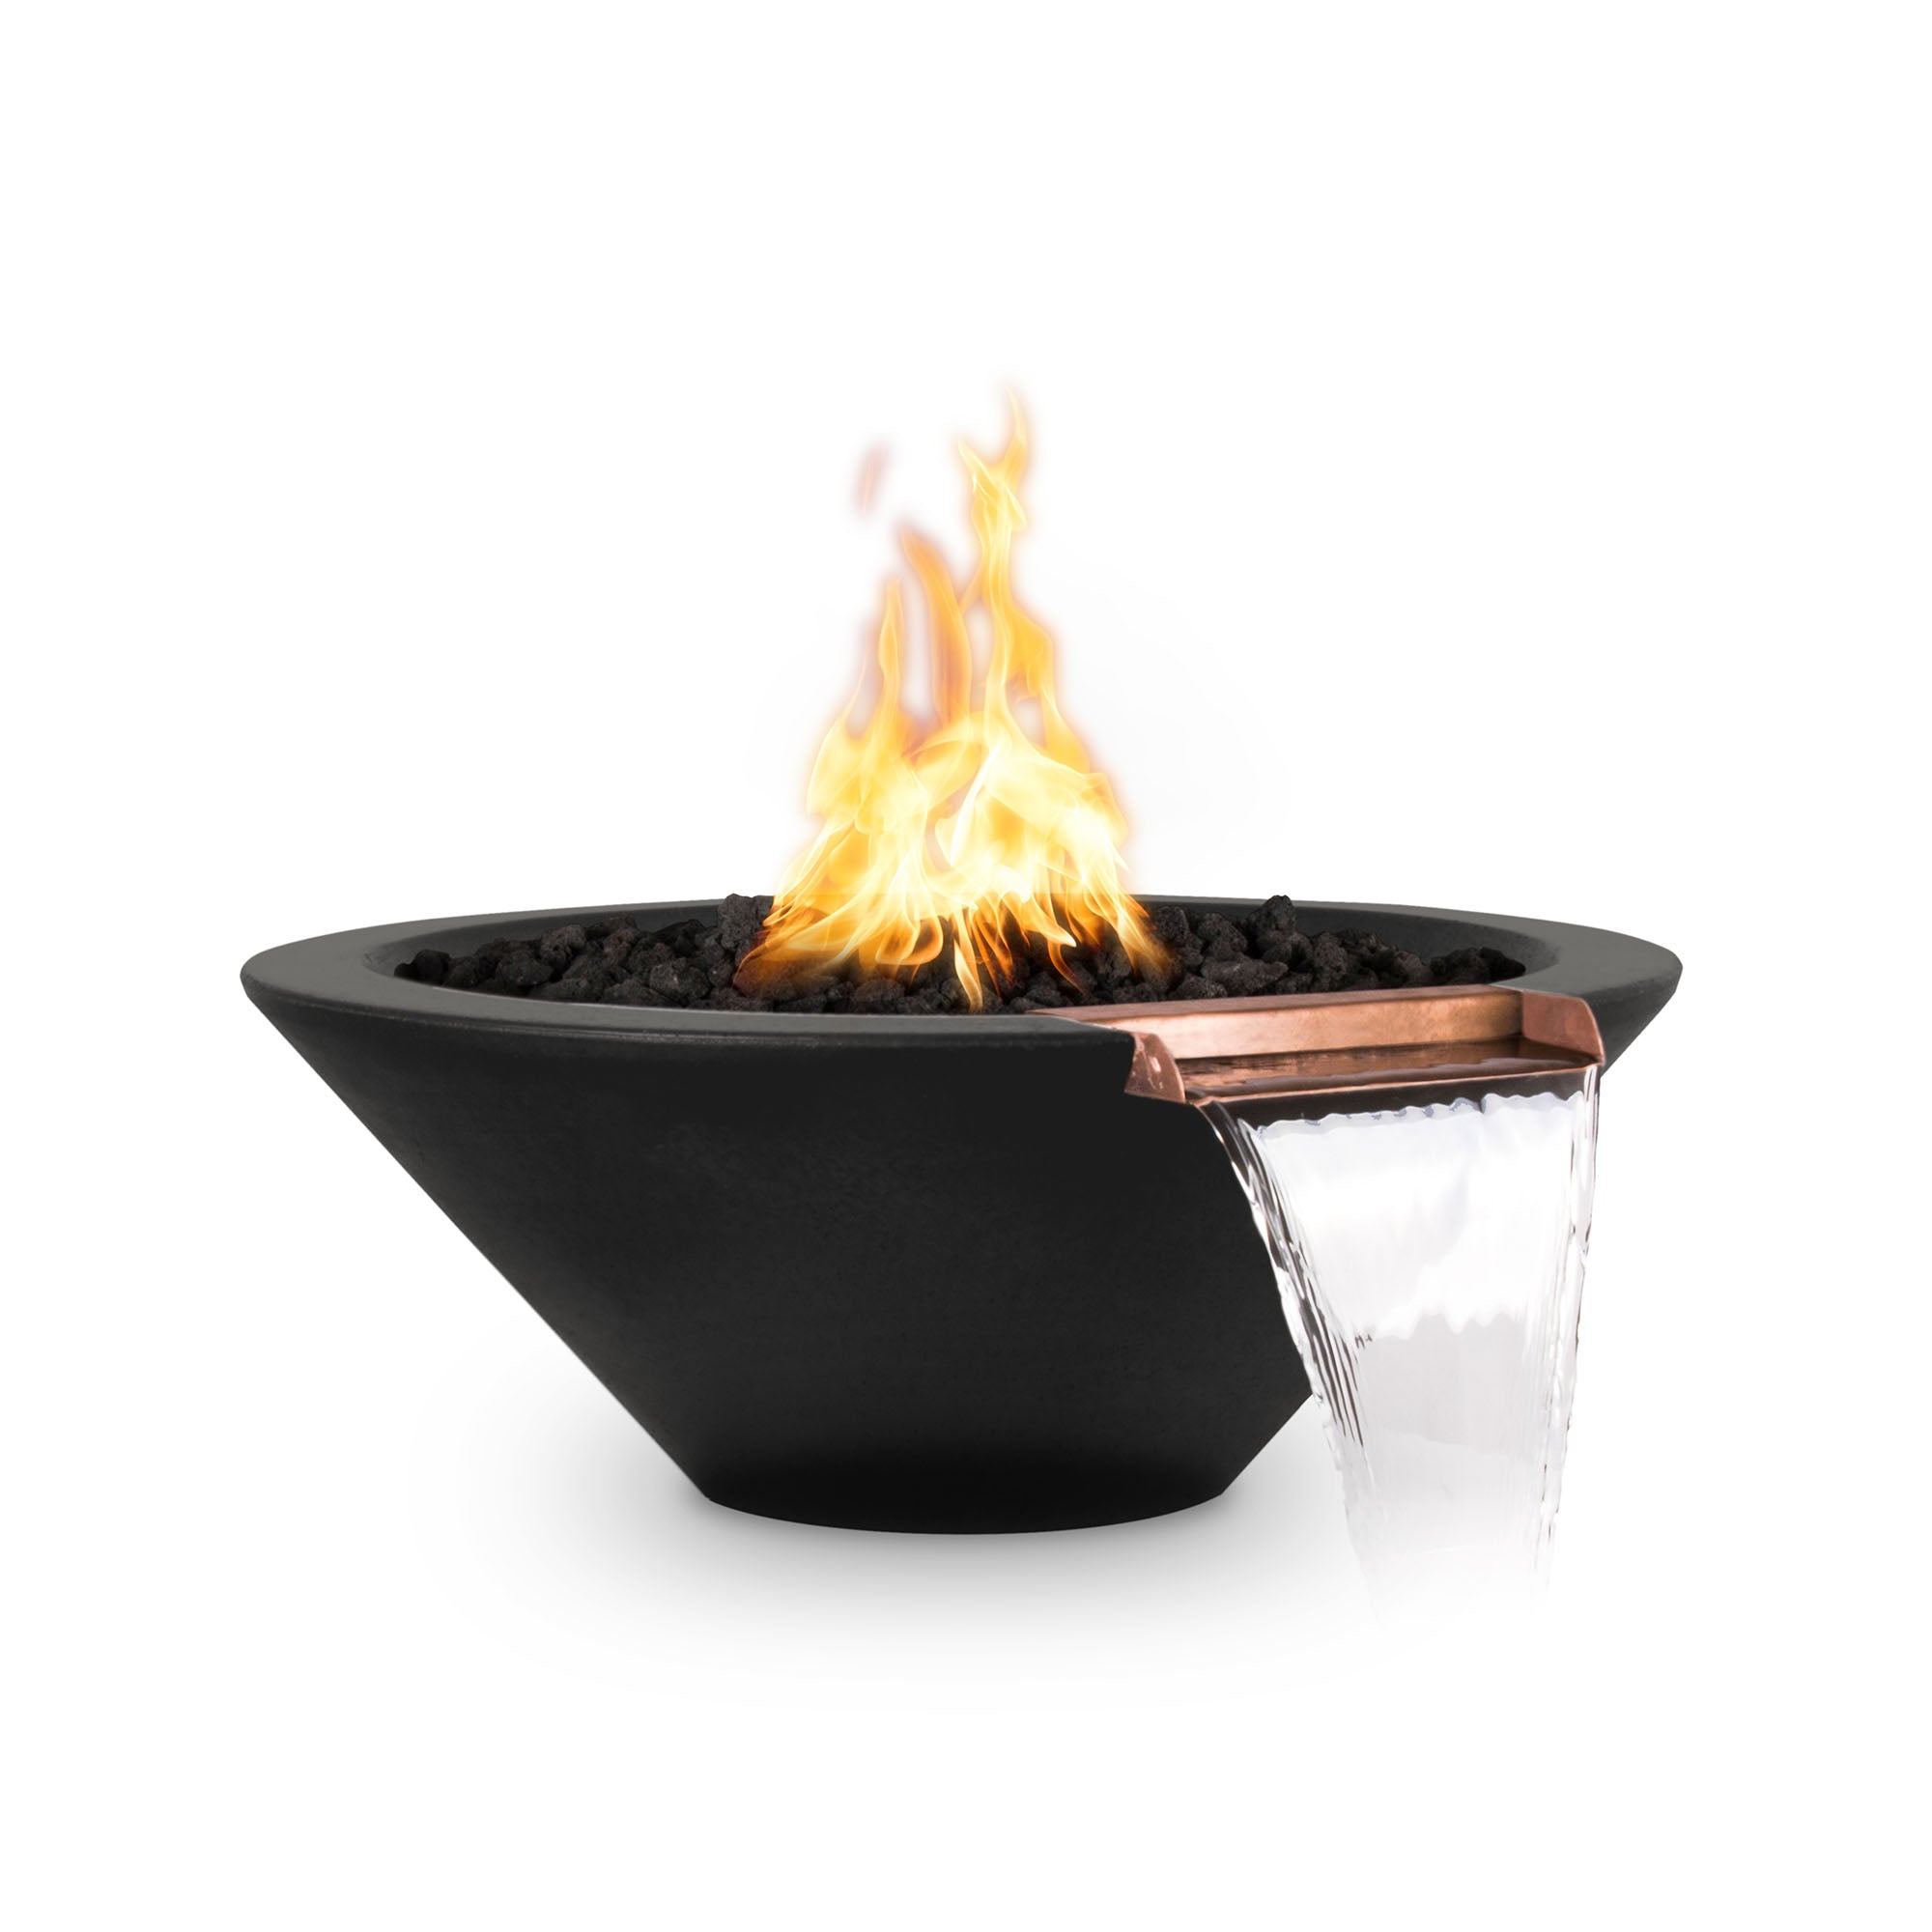 The Outdoor Plus 24" Cazo GFRC Fire and Water Bowl Lit and flowing